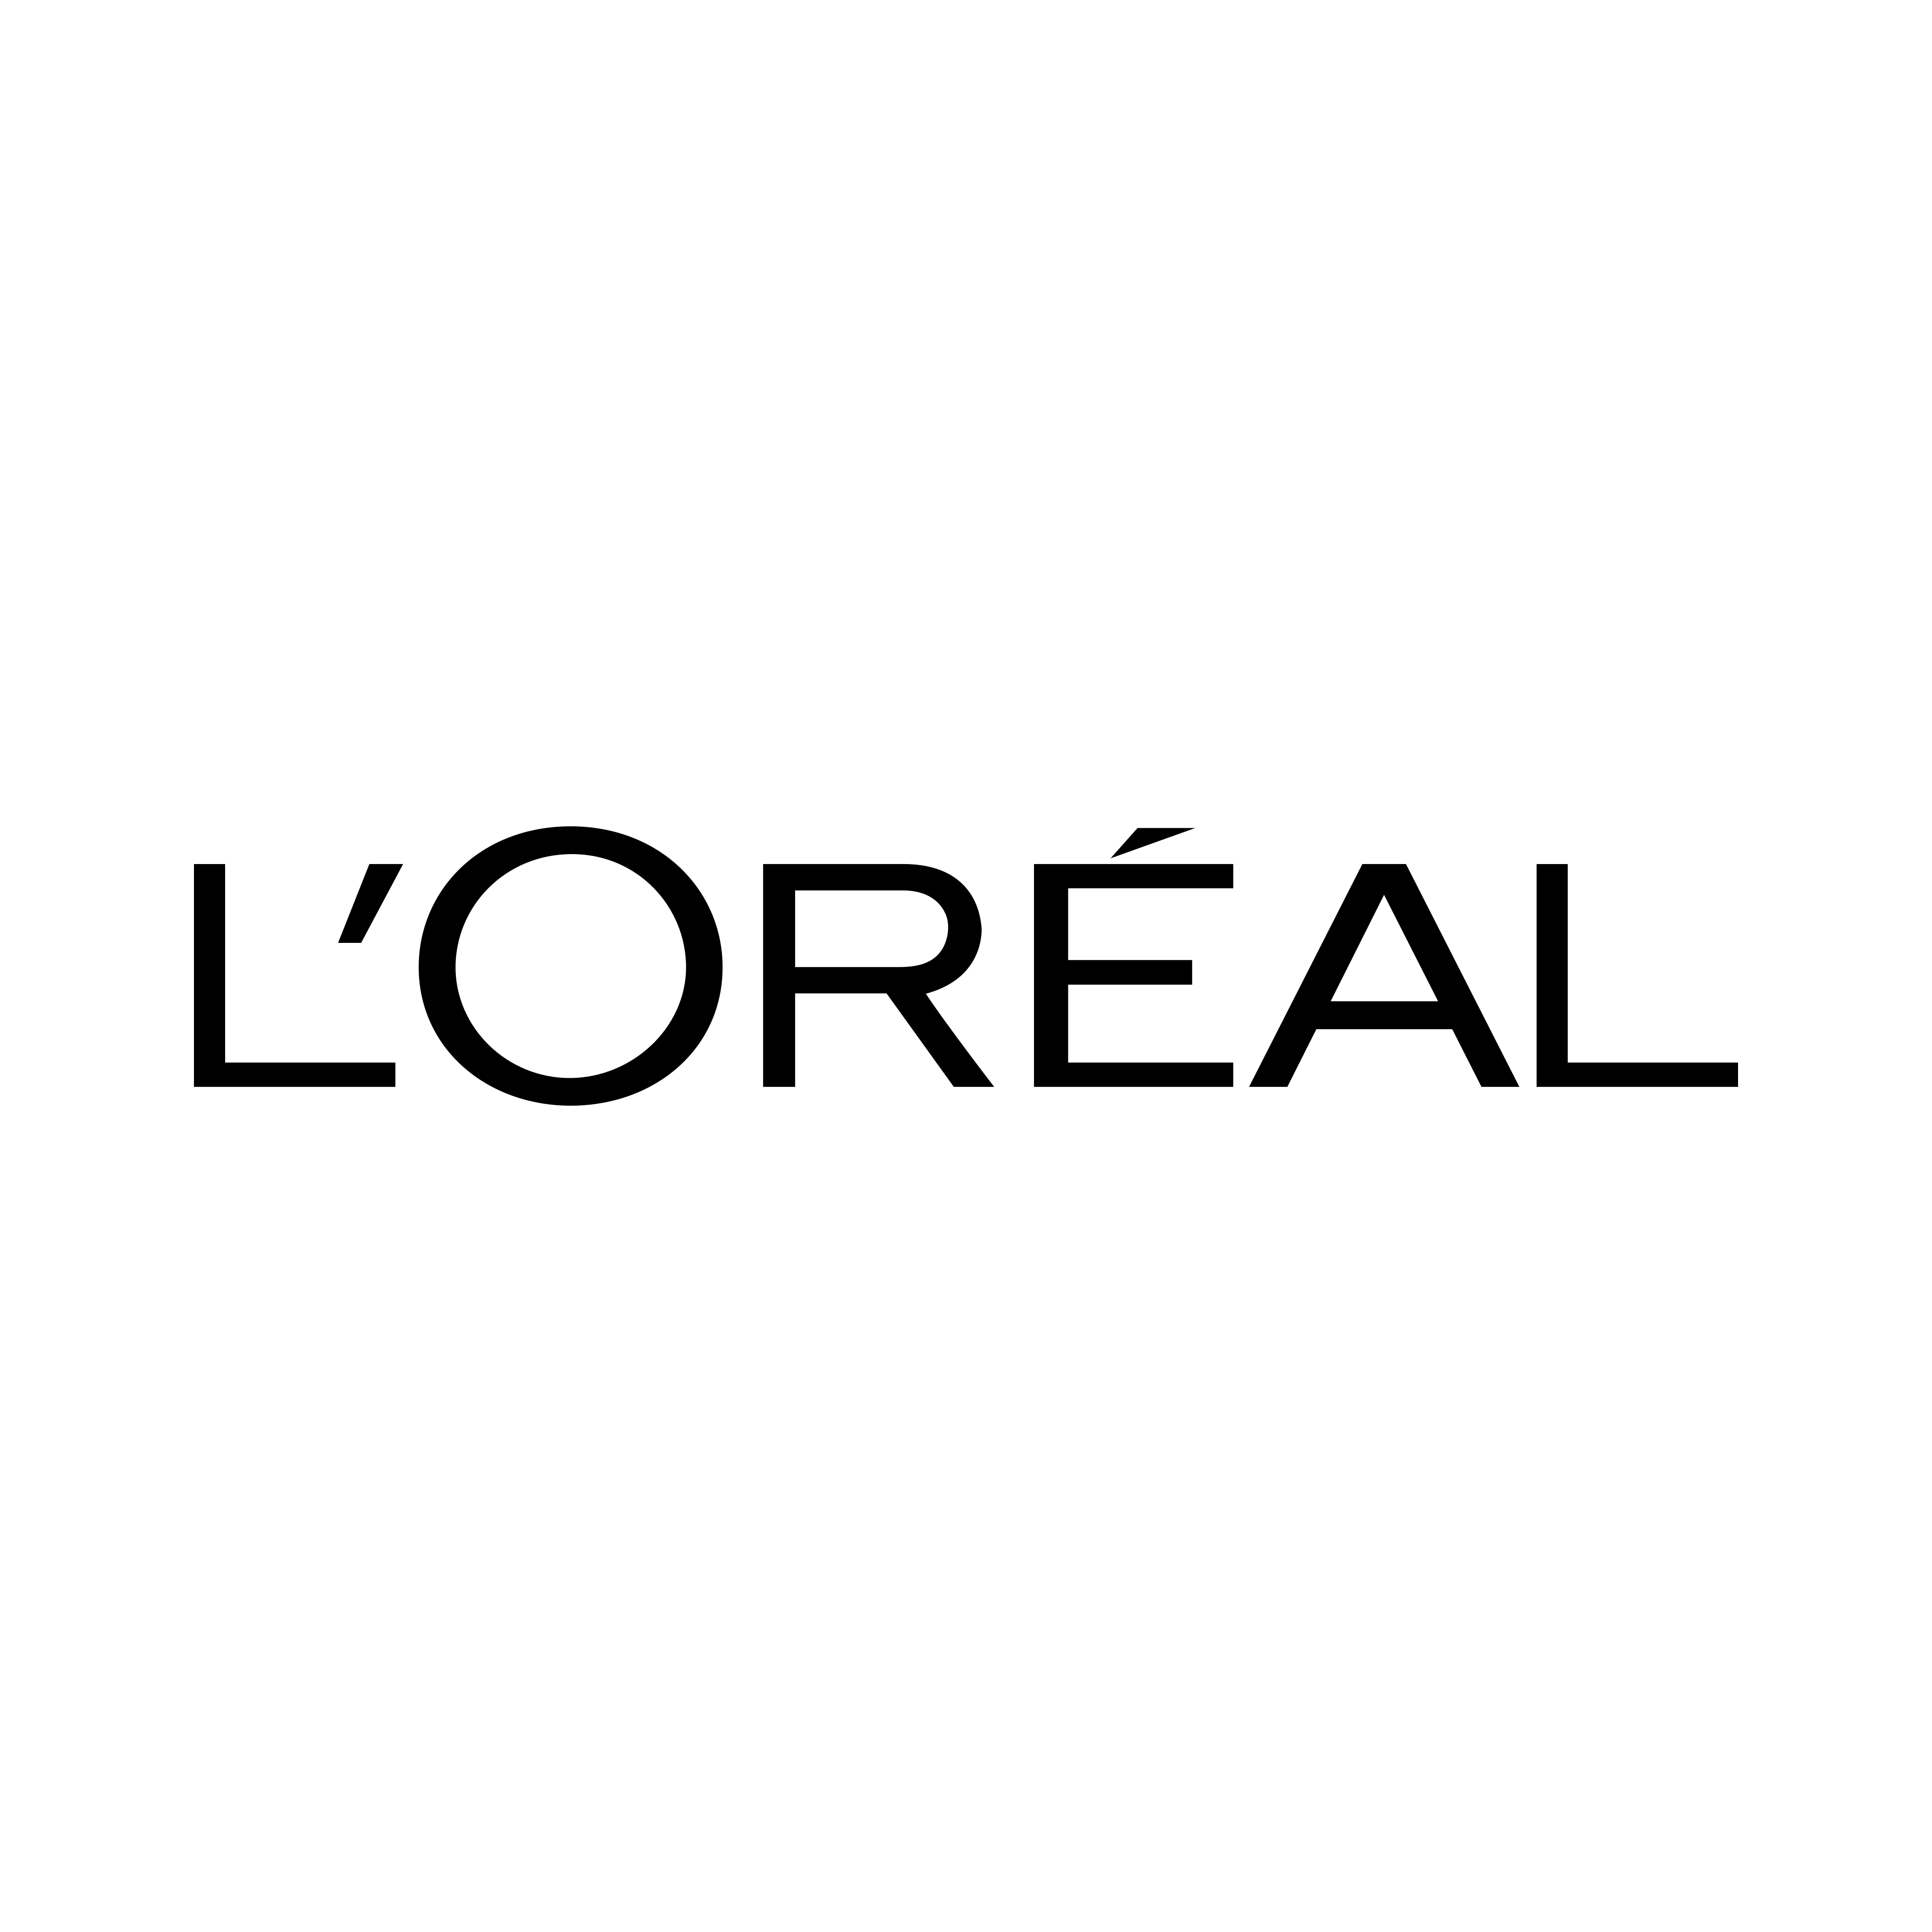 Logo of L’Oréal one of our partners